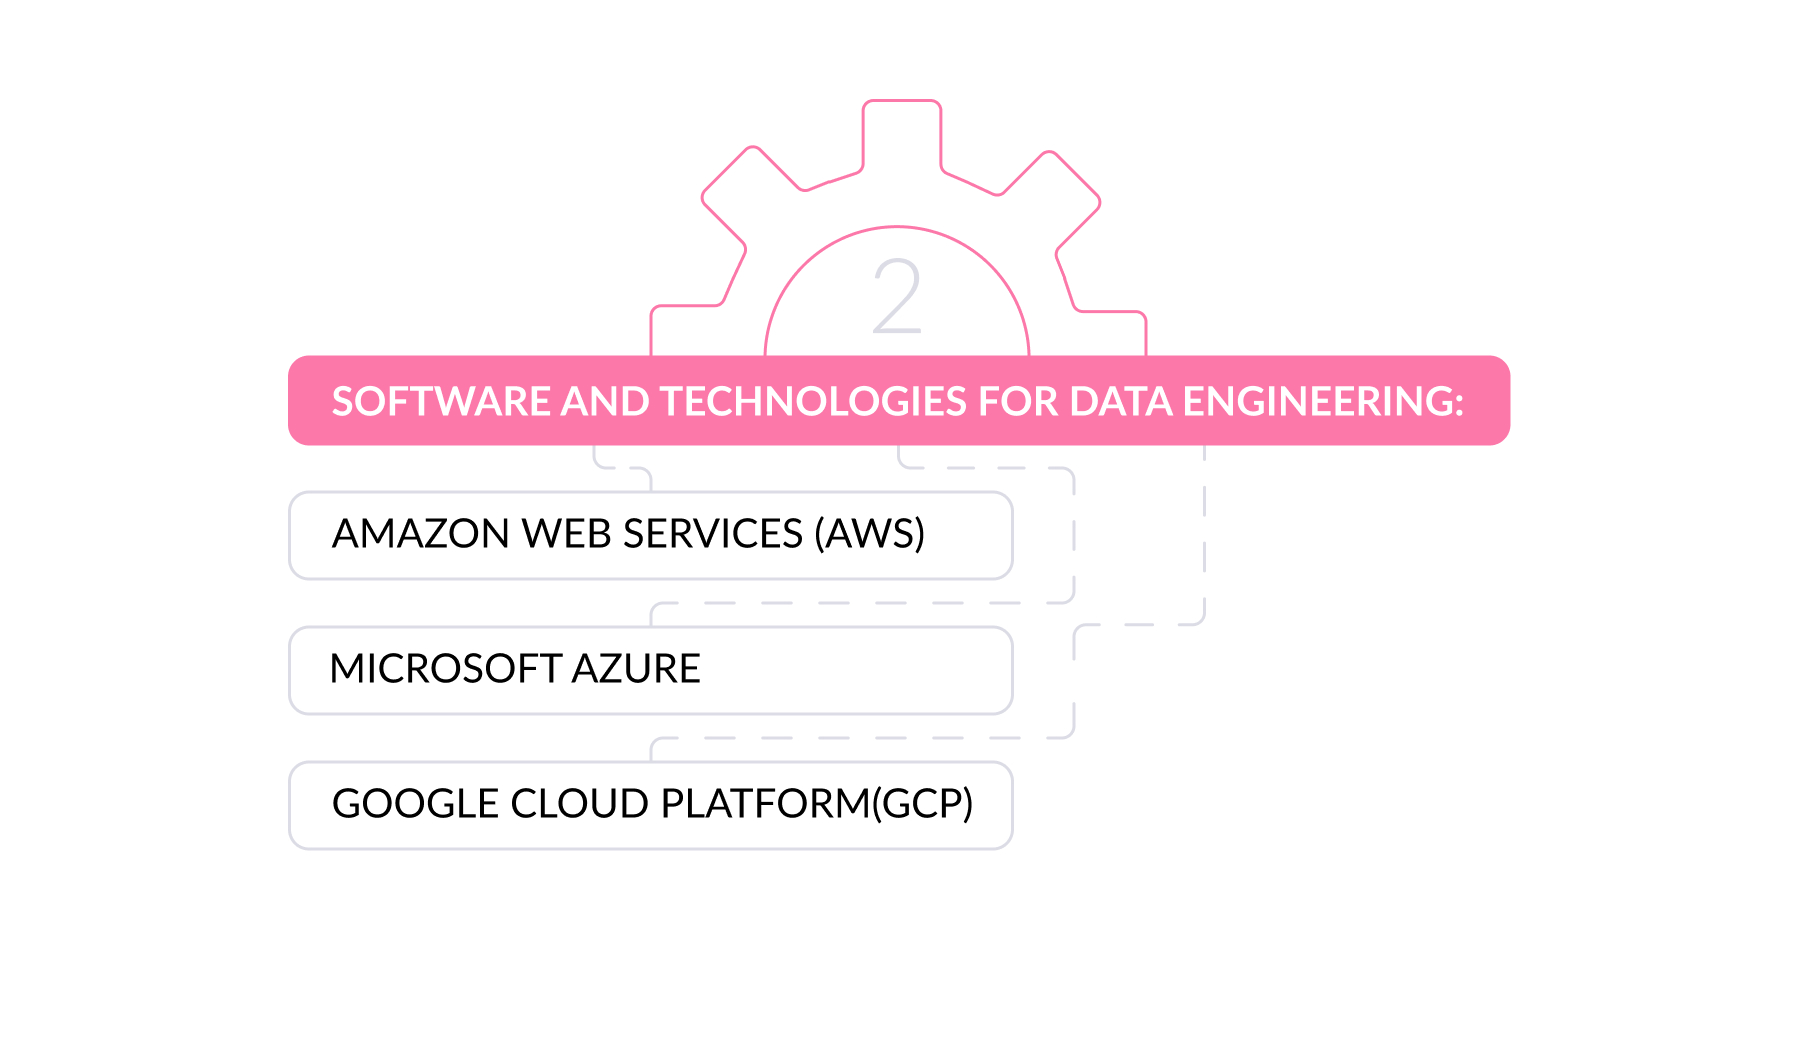 SOFTWARE AND TECHNOLOGIES FOR DATA ENGINEERING